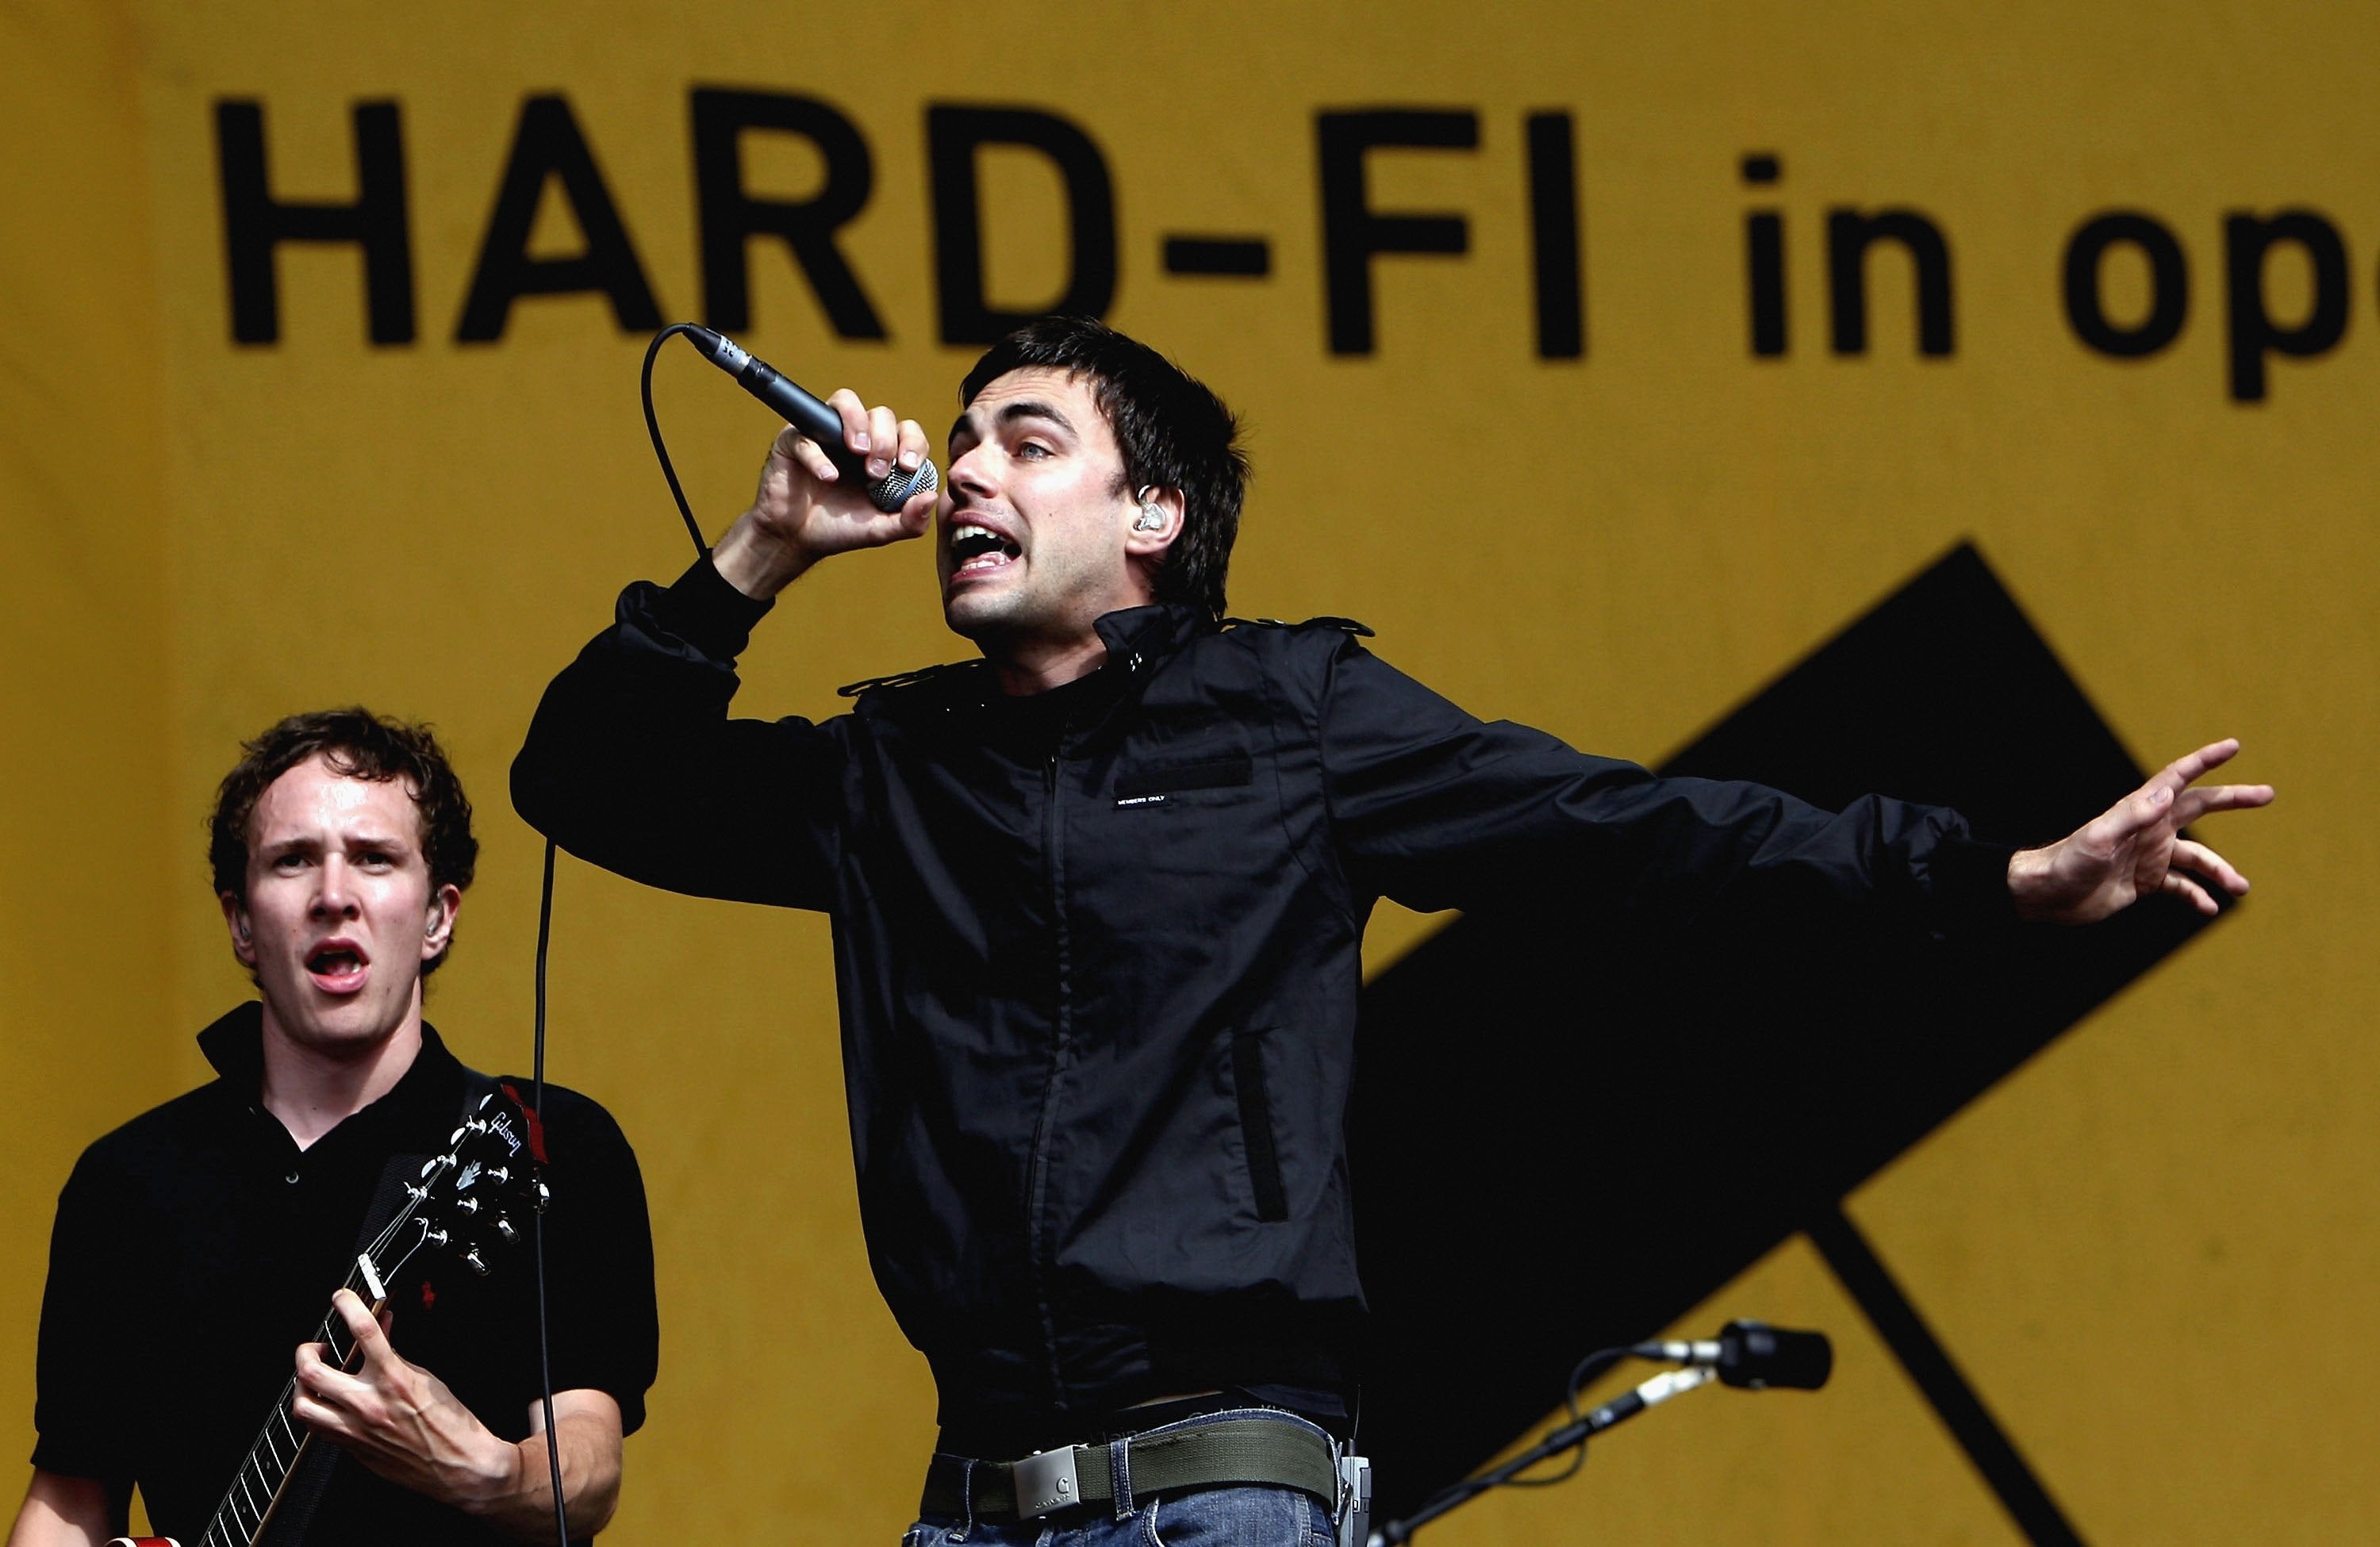 Richard Archer (centre) performing with Hard-Fi at T in the Park, 2006